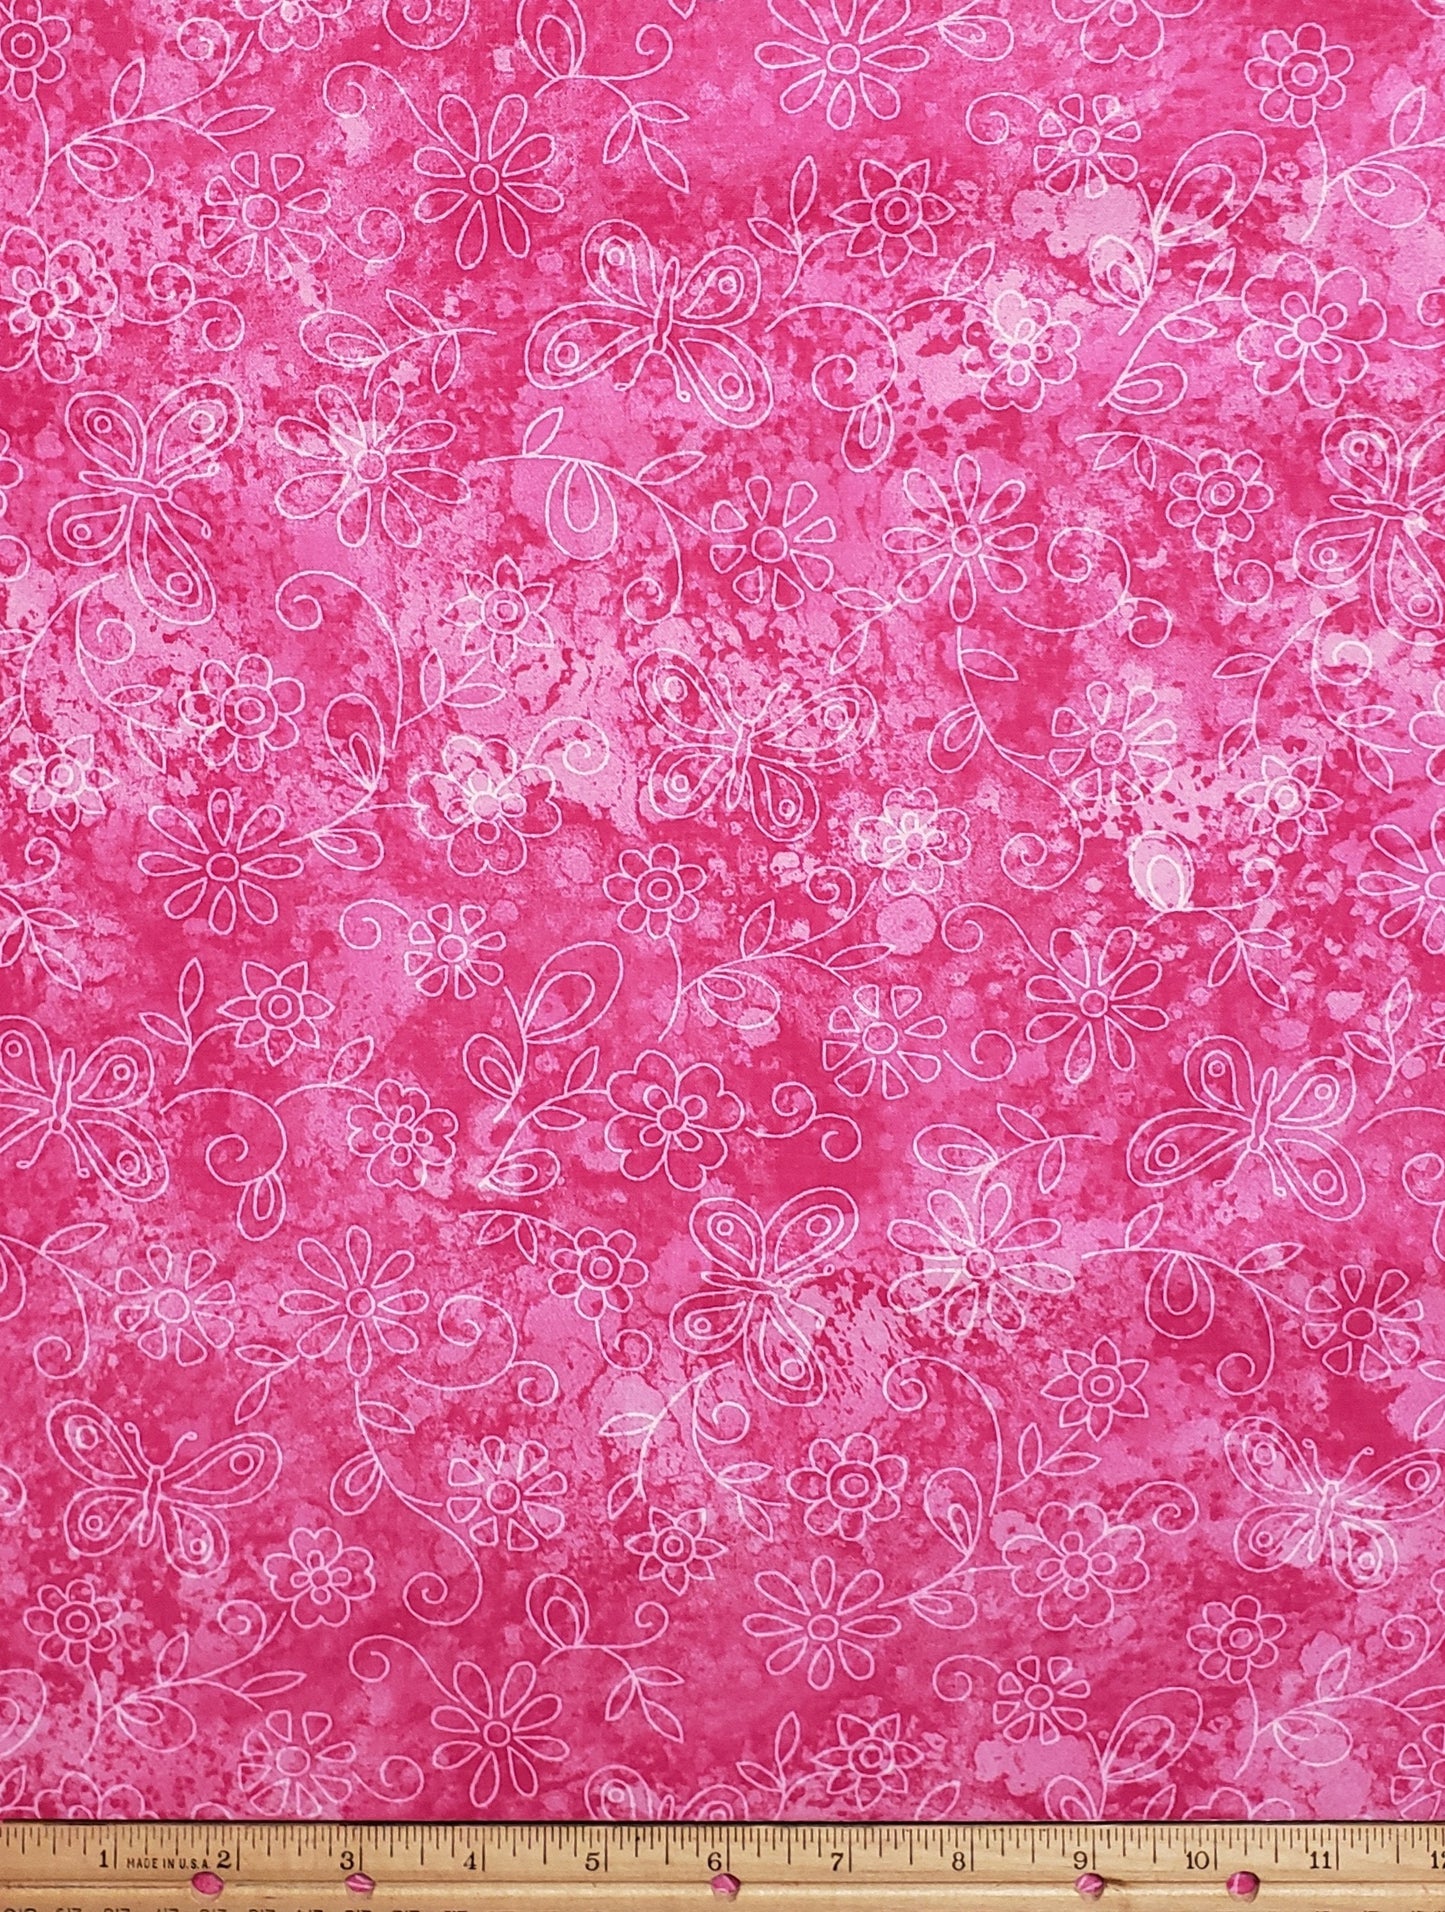 EOB - Fabric Traditions 2007 - Bright Pink Tonal Fabric / White Outlined Flowers and Butterflies